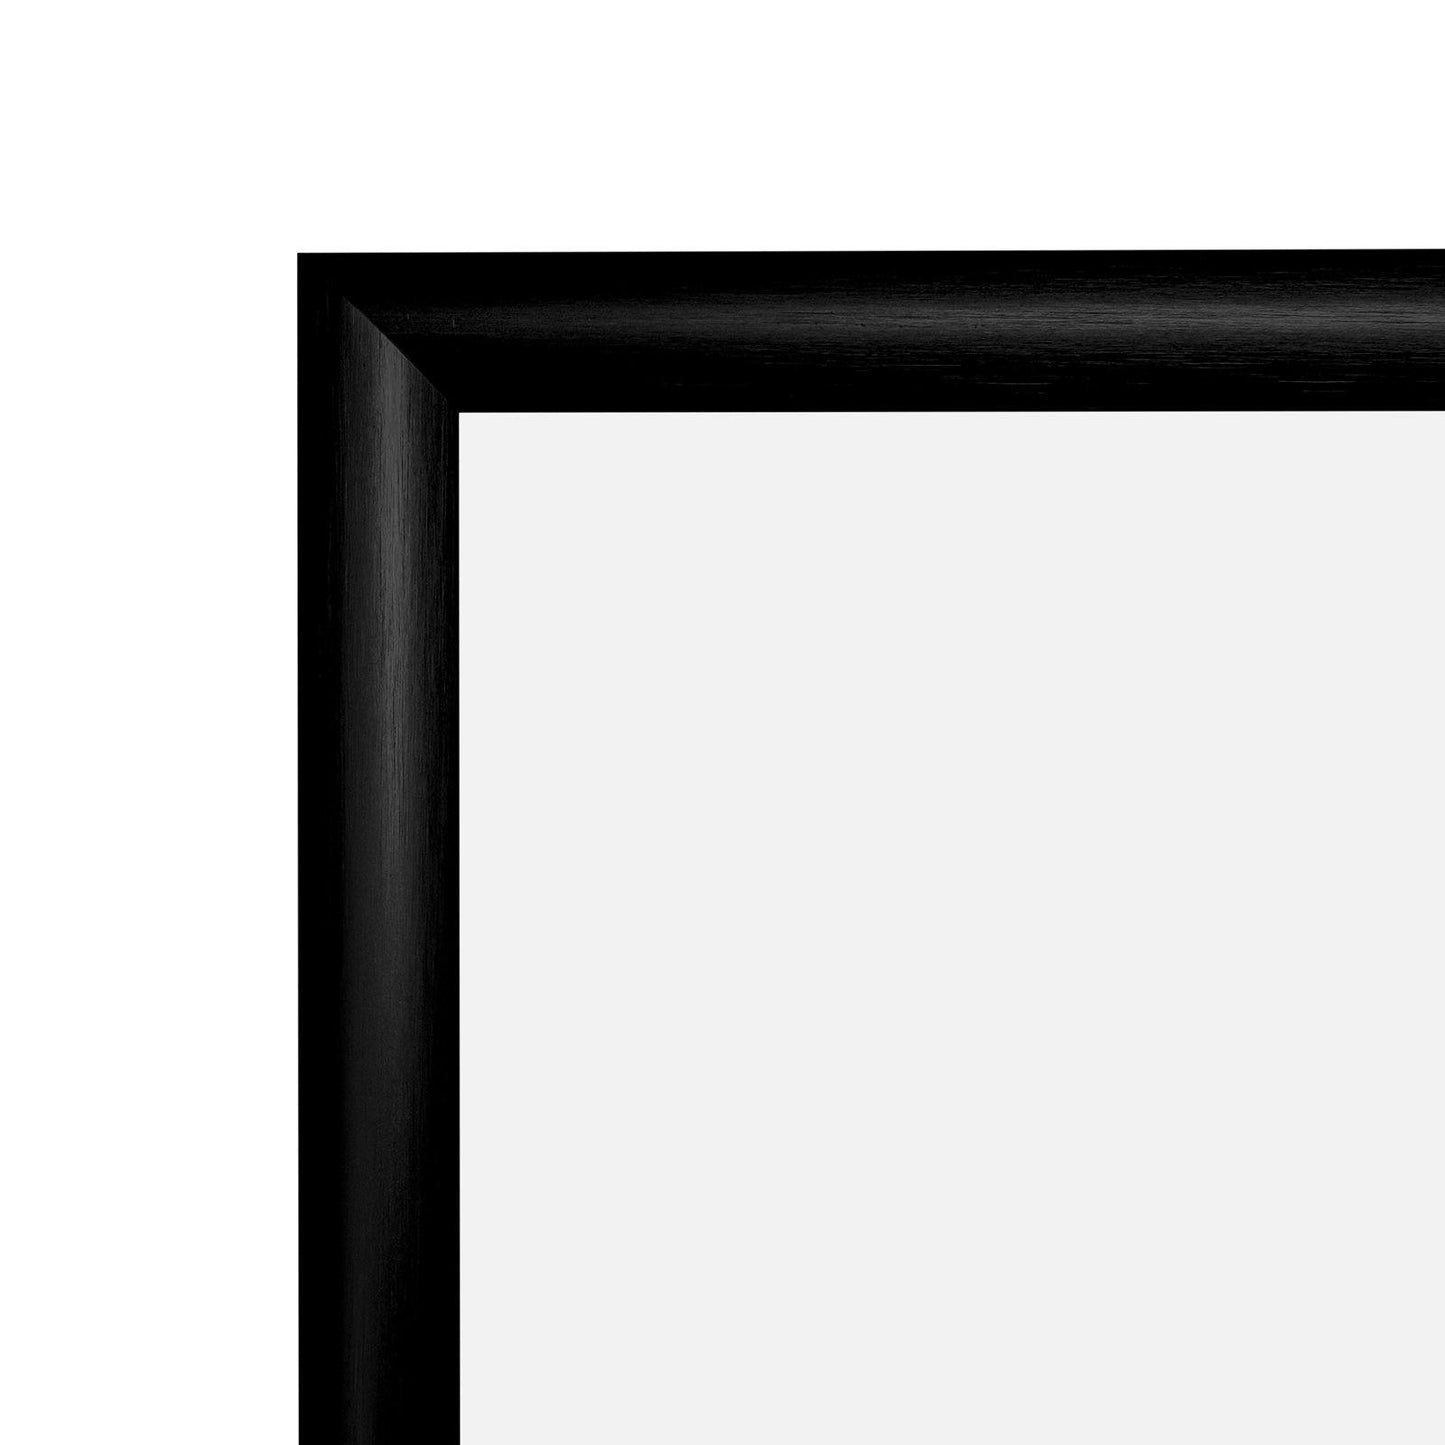 Load image into Gallery viewer, A3 Brushed Black SnapeZo® Snap Frame - 1 Inch Profile
